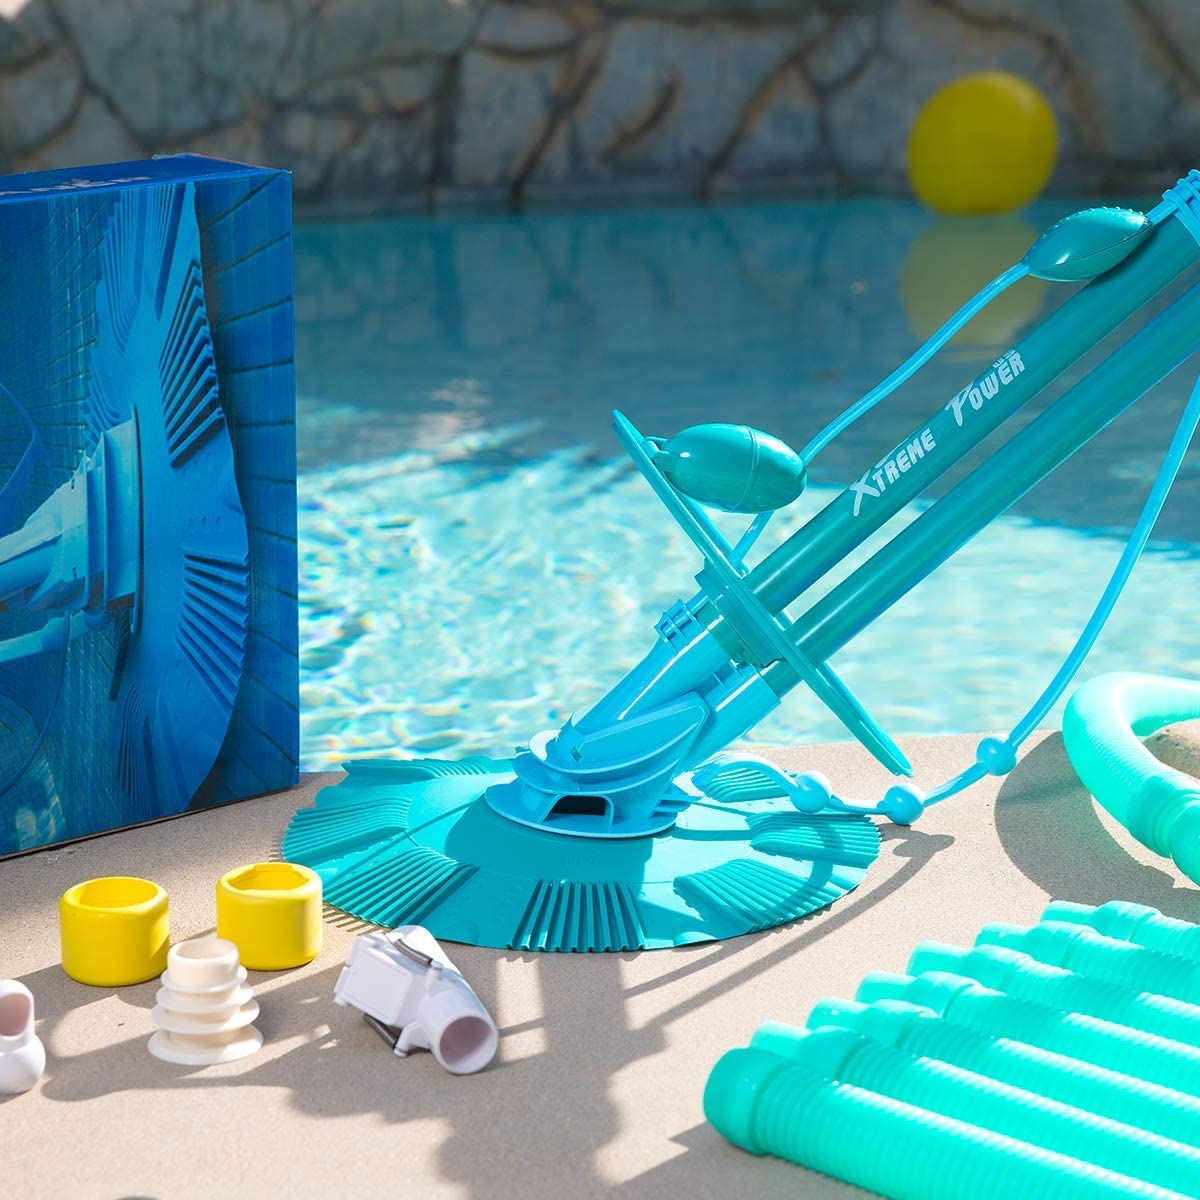 XtremepowerUS 75037 Non-Electric Self-Navigating Pool Cleaner